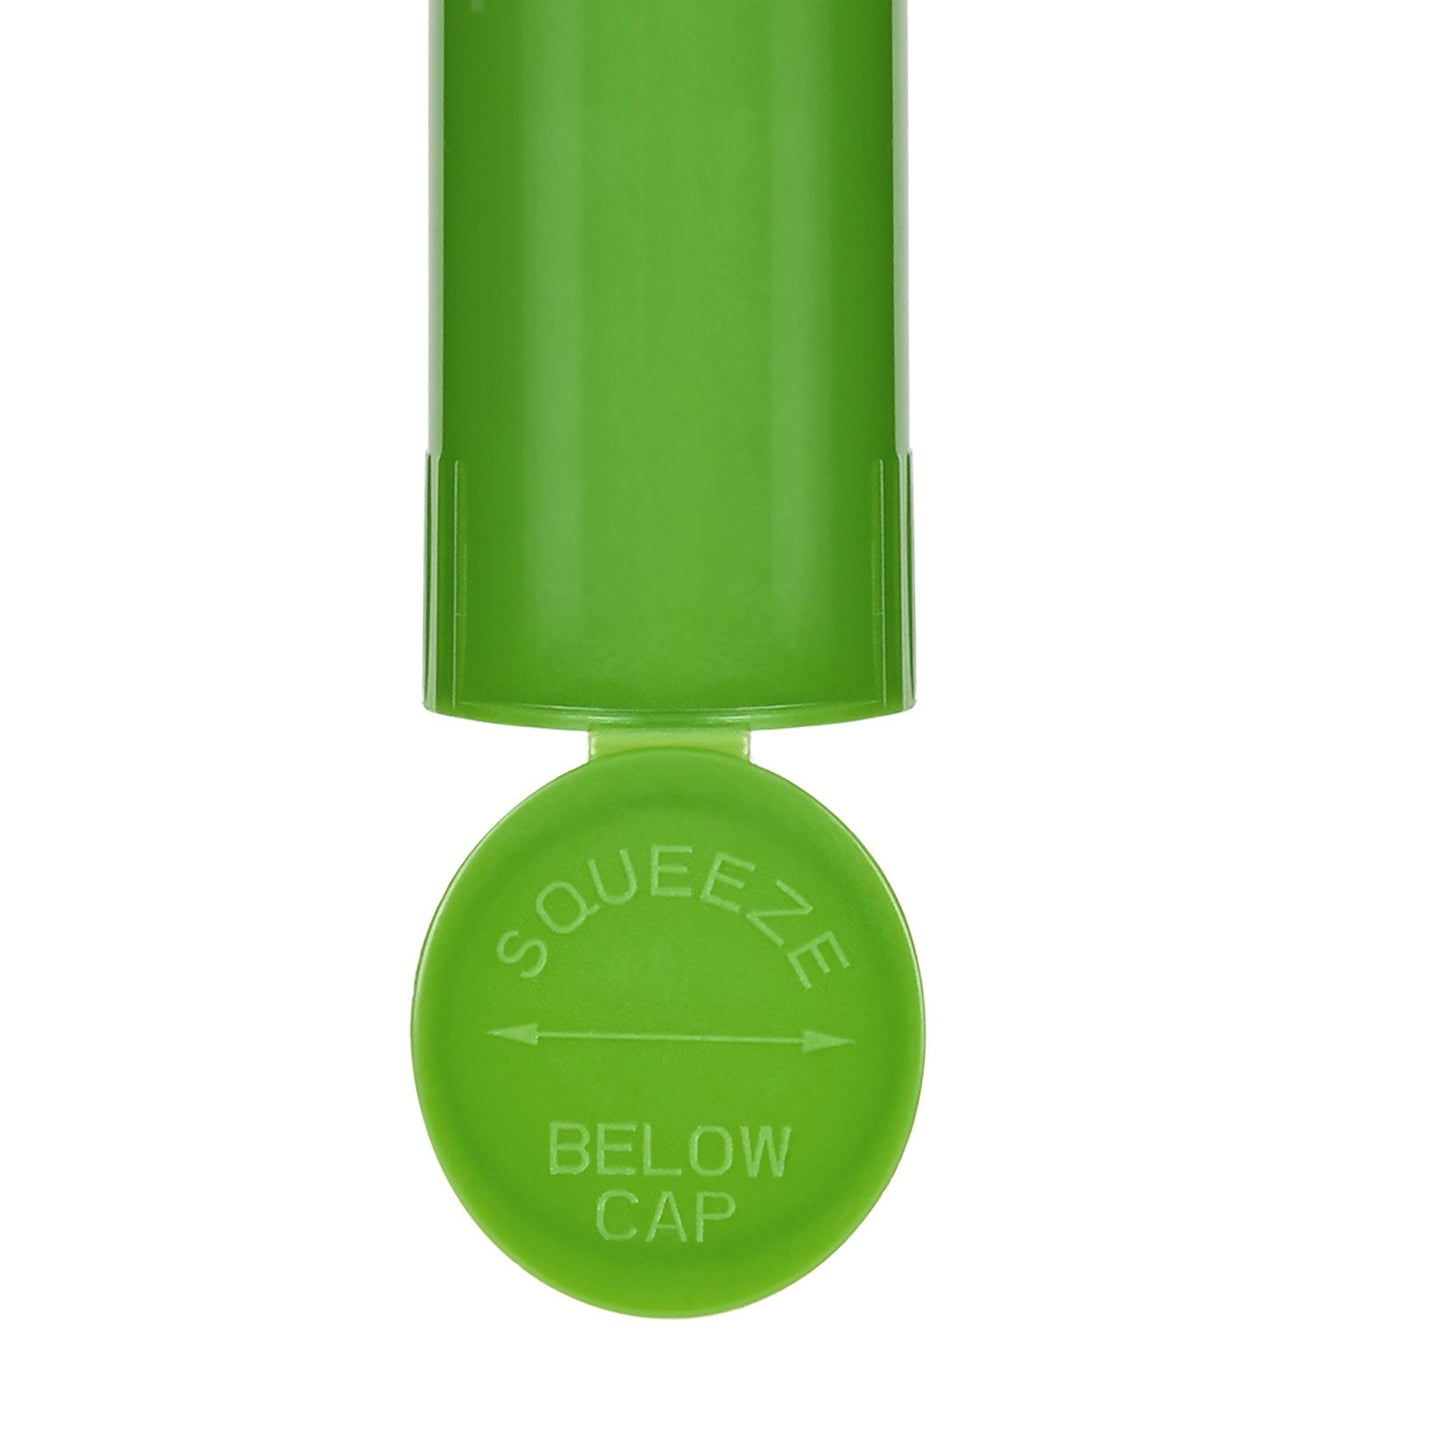 120mm RX Squeeze Tubes Opaque Green 500 COUNT